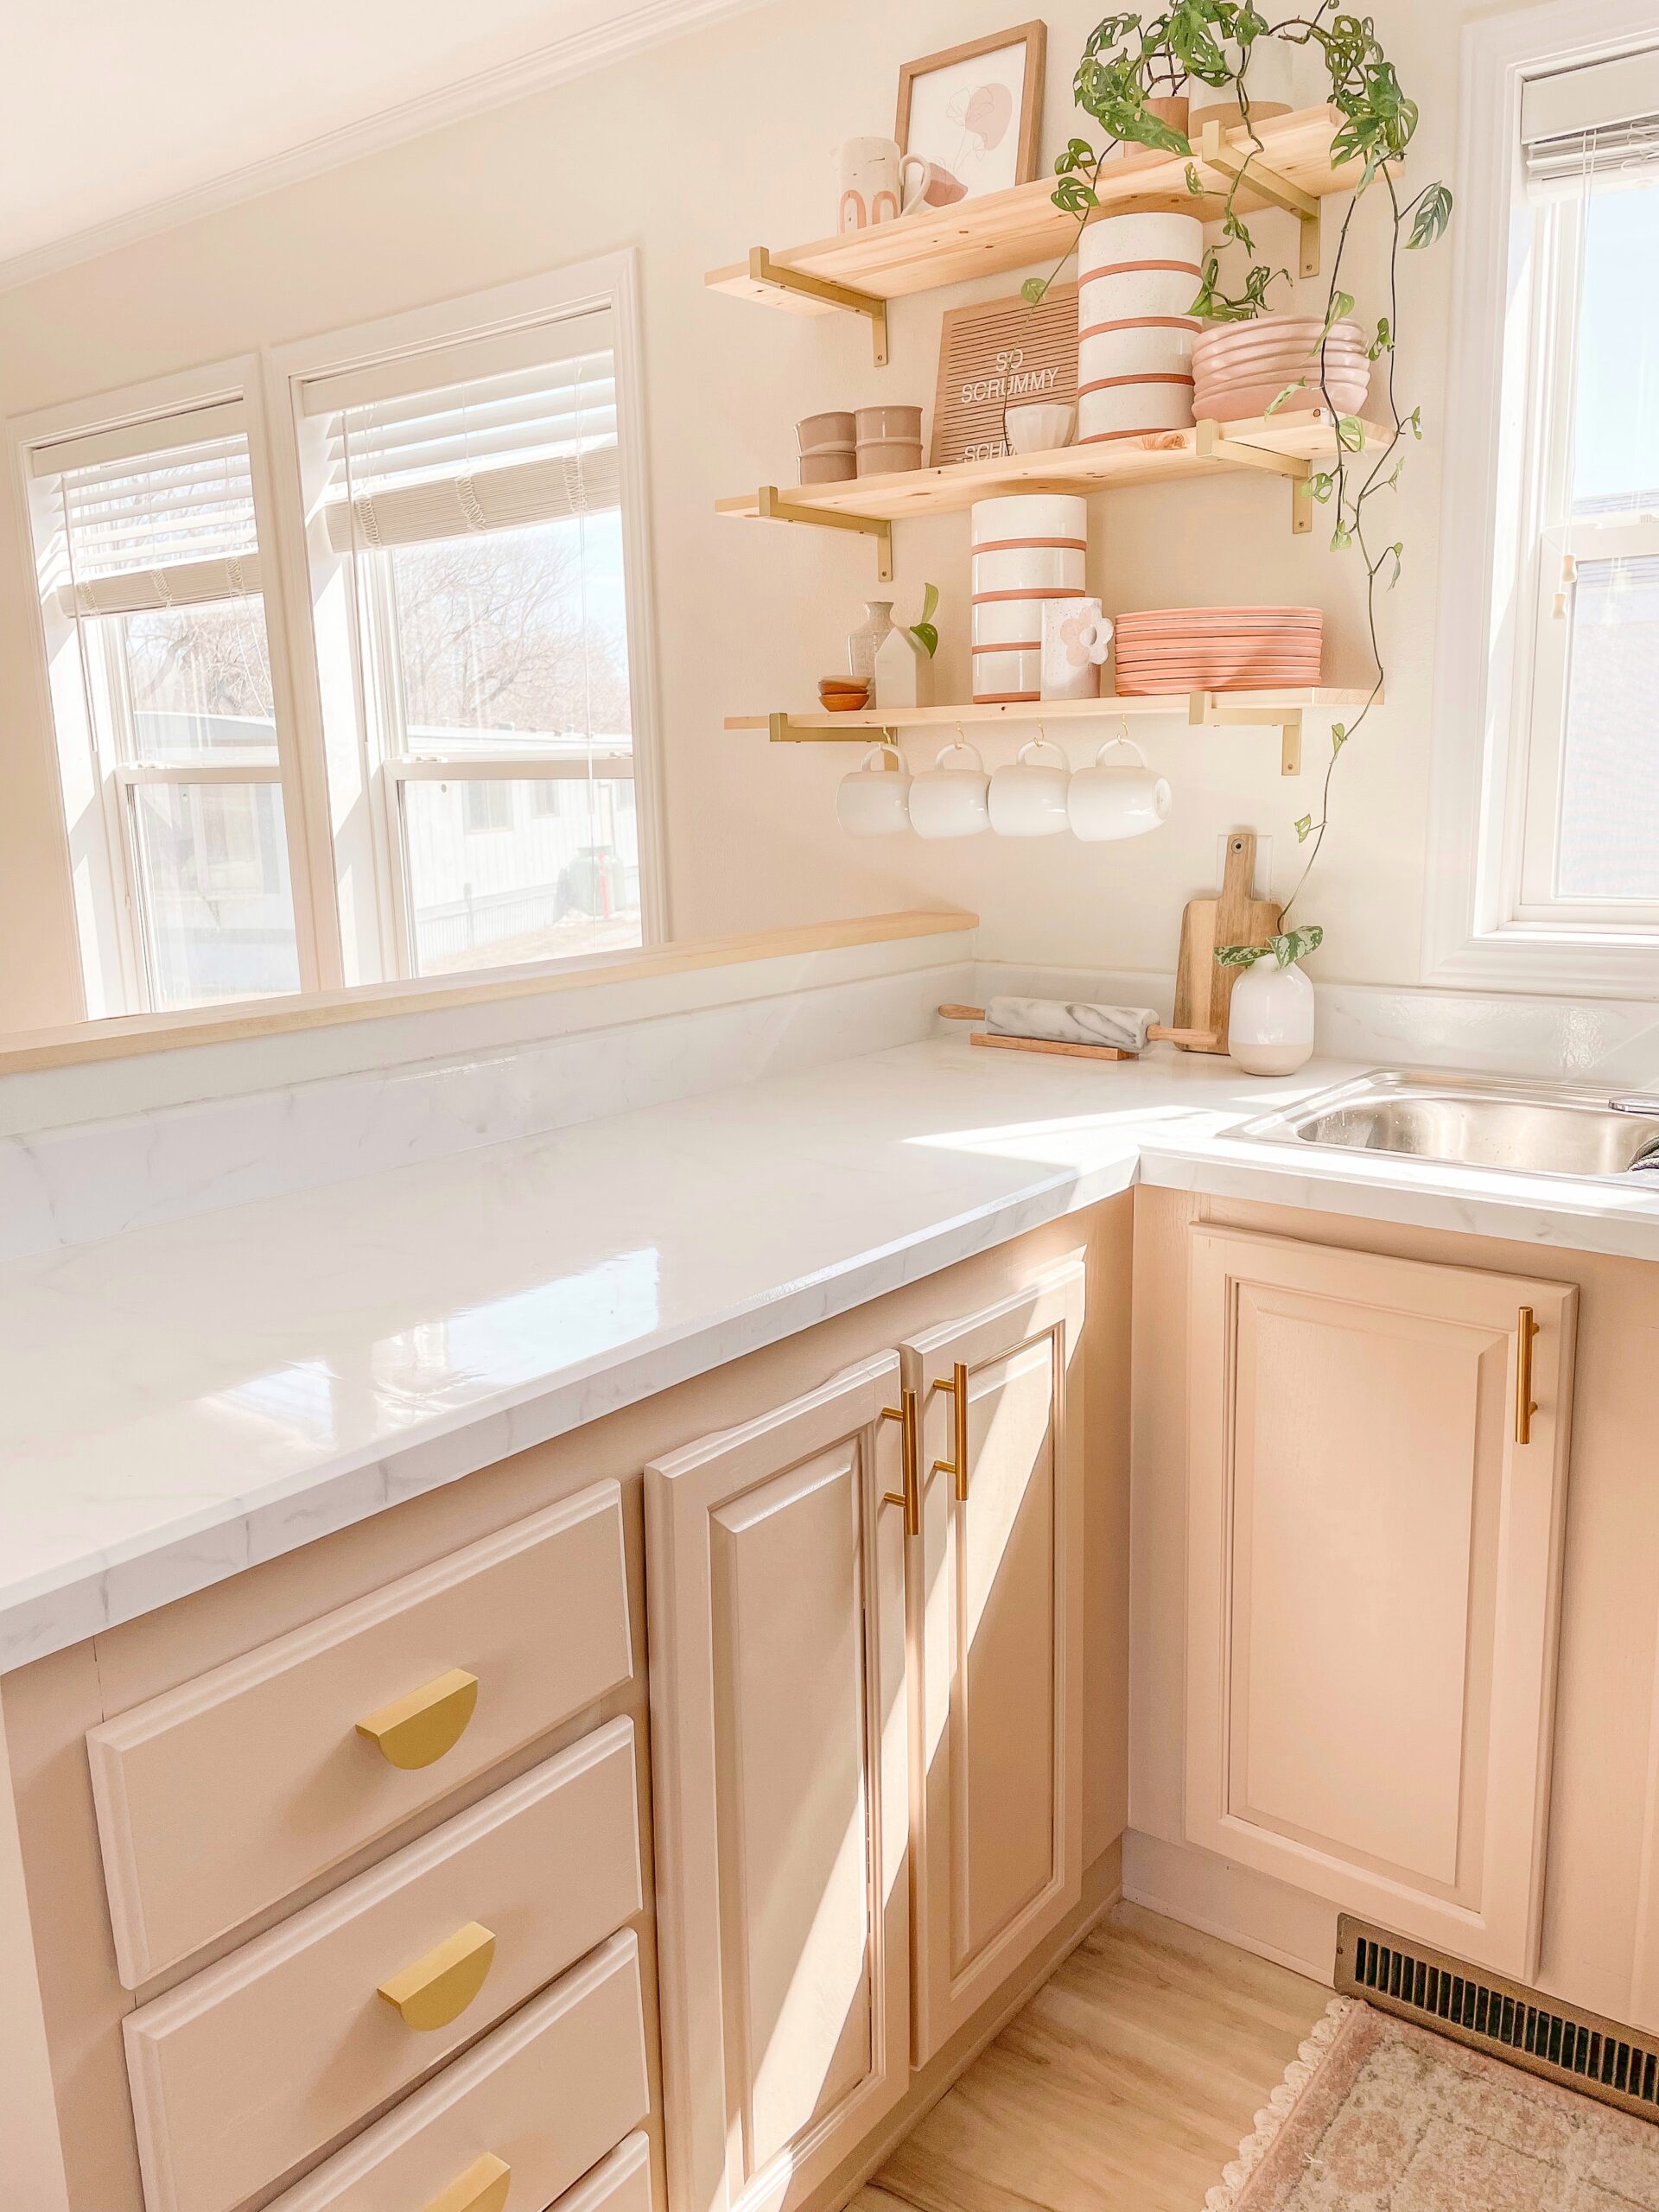 DIY Marble Countertops - How To Get The Look With Paint & Epoxy -  farmhouseish